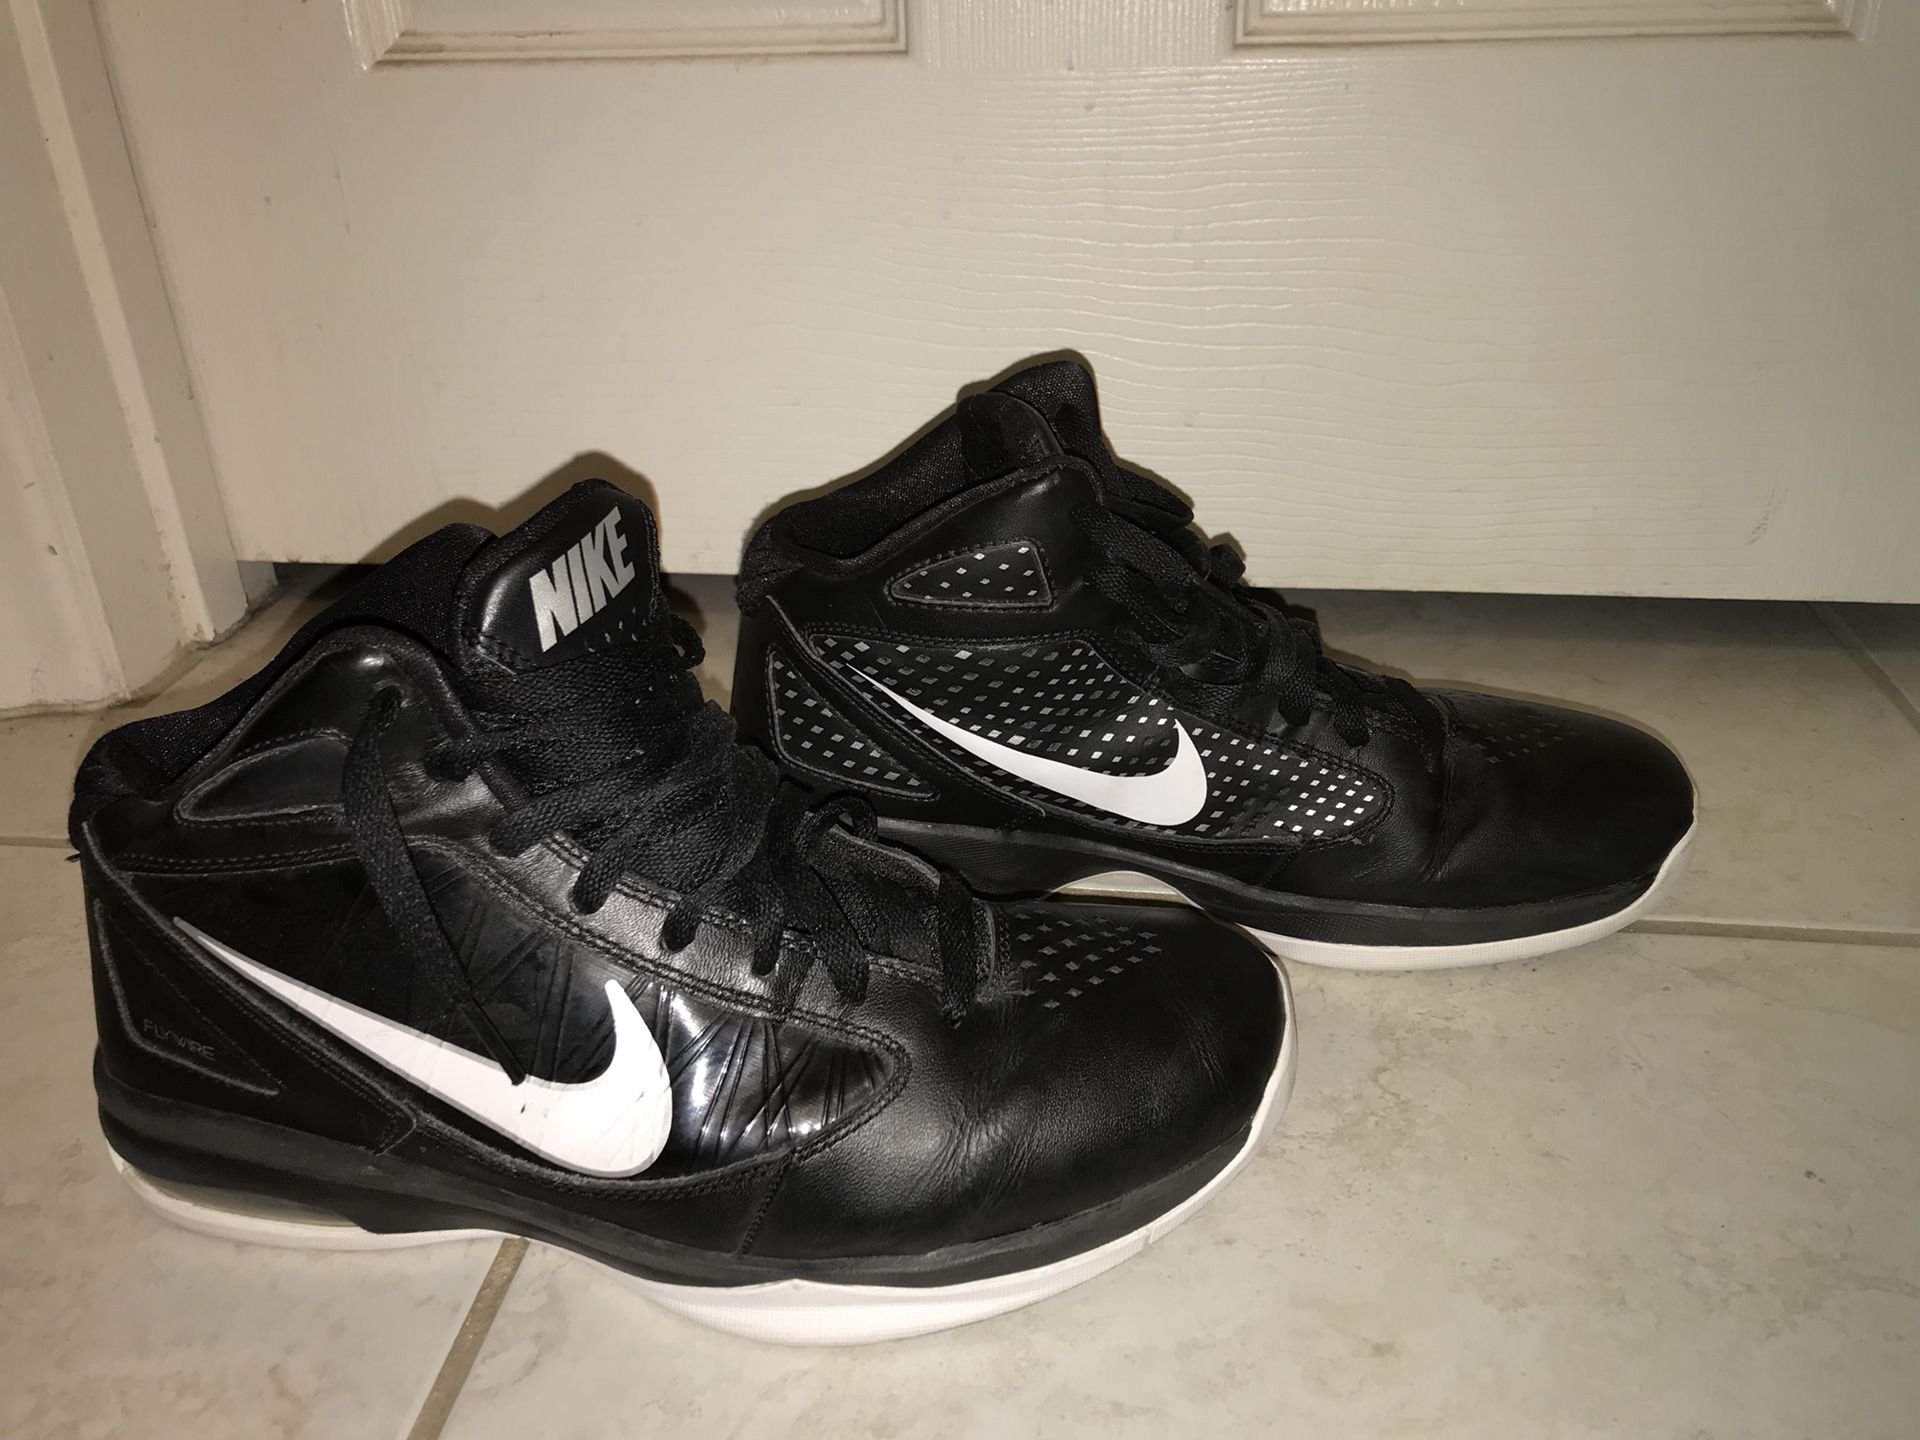 Women's Nike Flywire basketball (size 8) for Sale in Alpine, CA - OfferUp